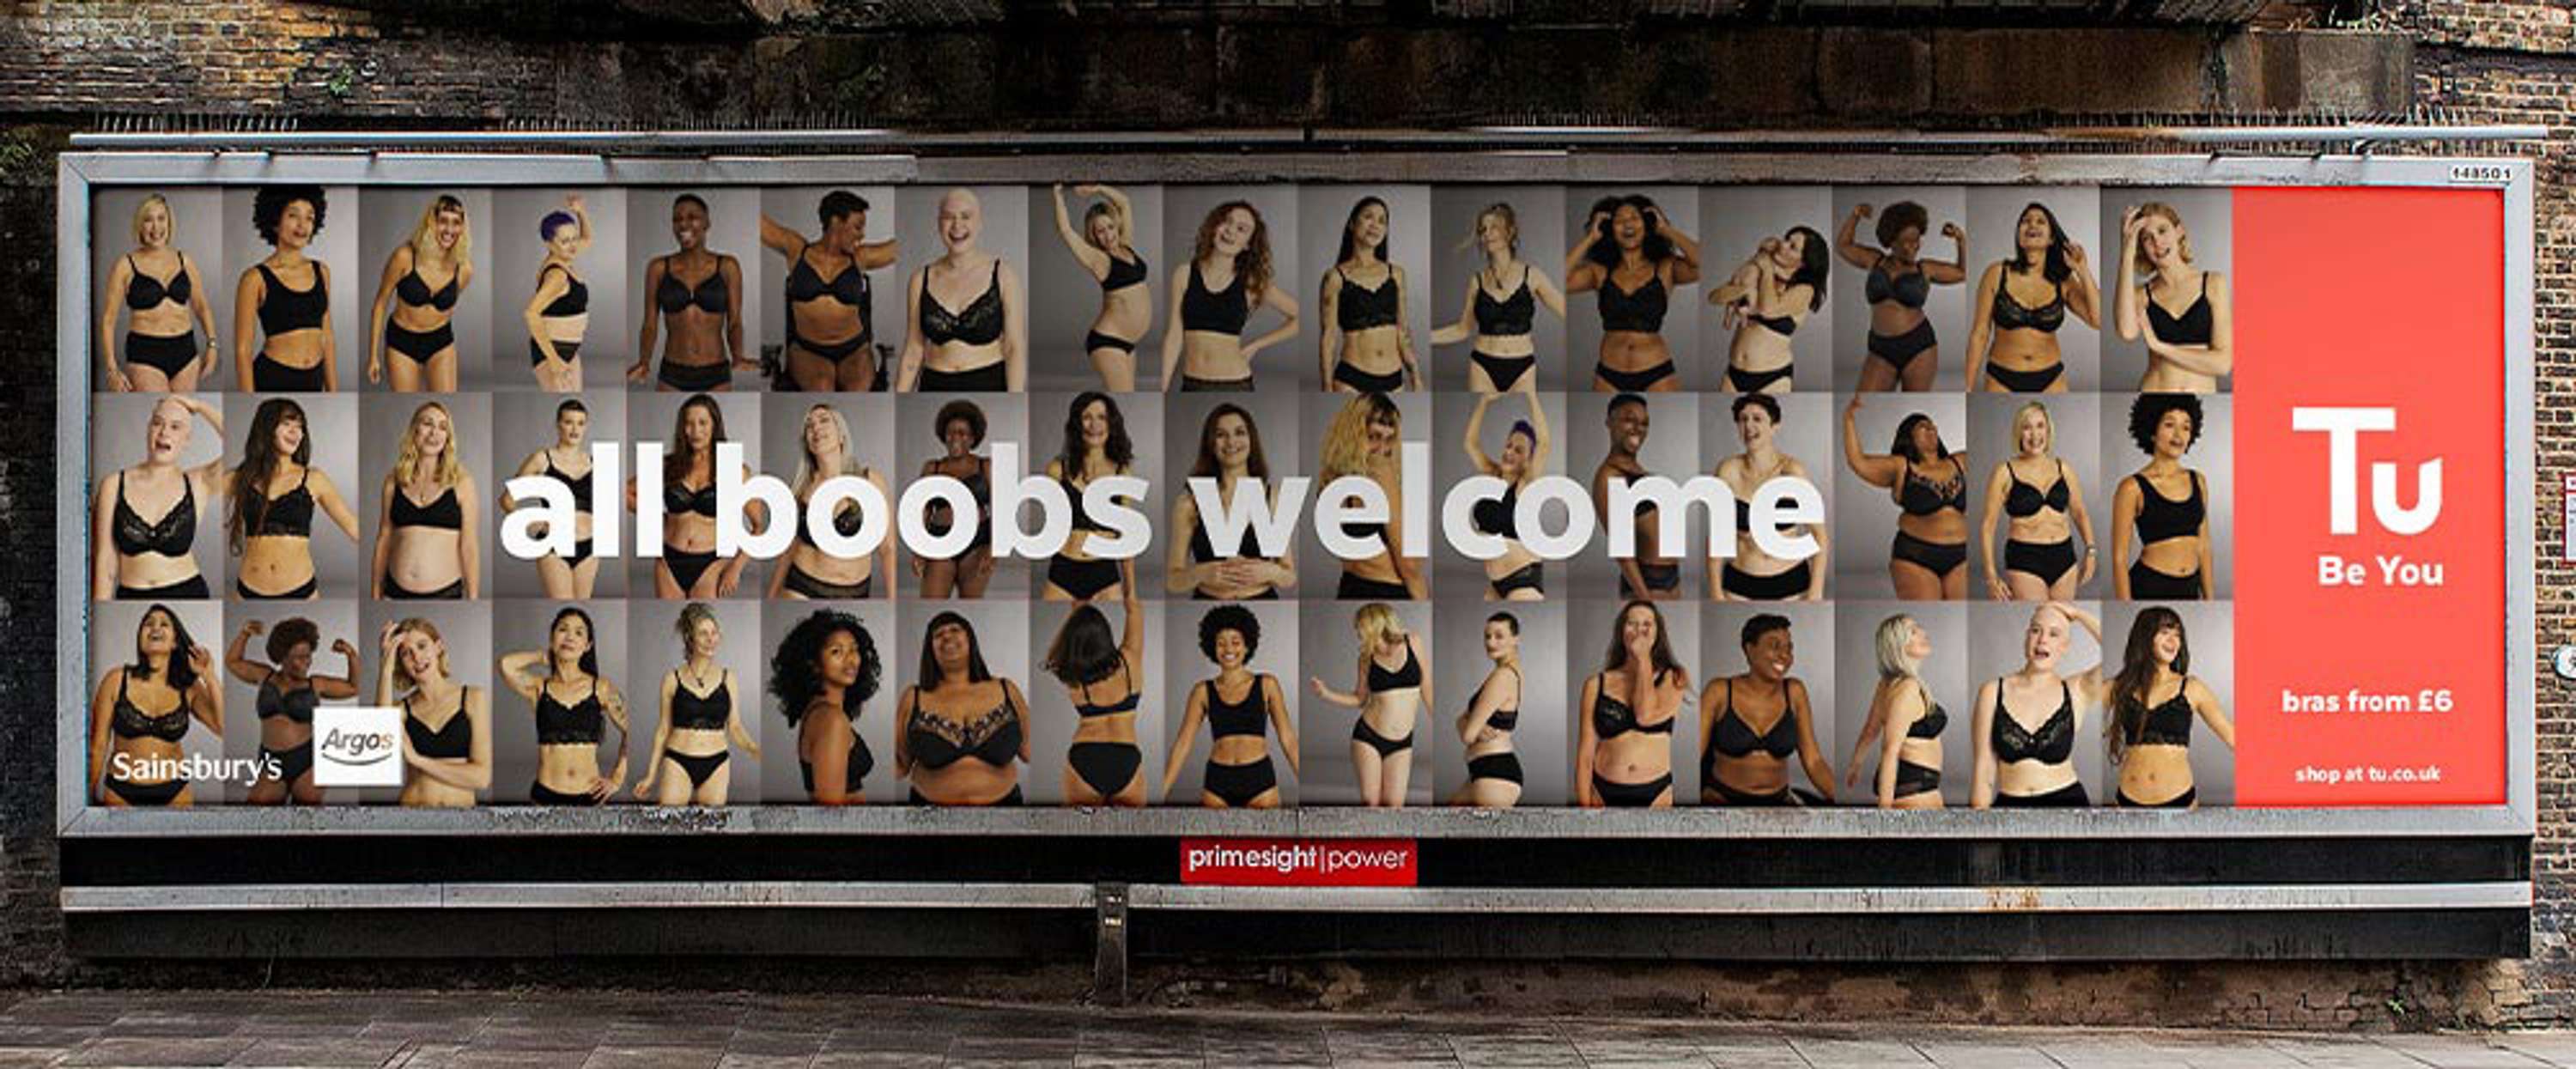 Baps, knockers or fried eggs – Sainsbury's Tu lingerie ad says 'All Boobs  Welcome